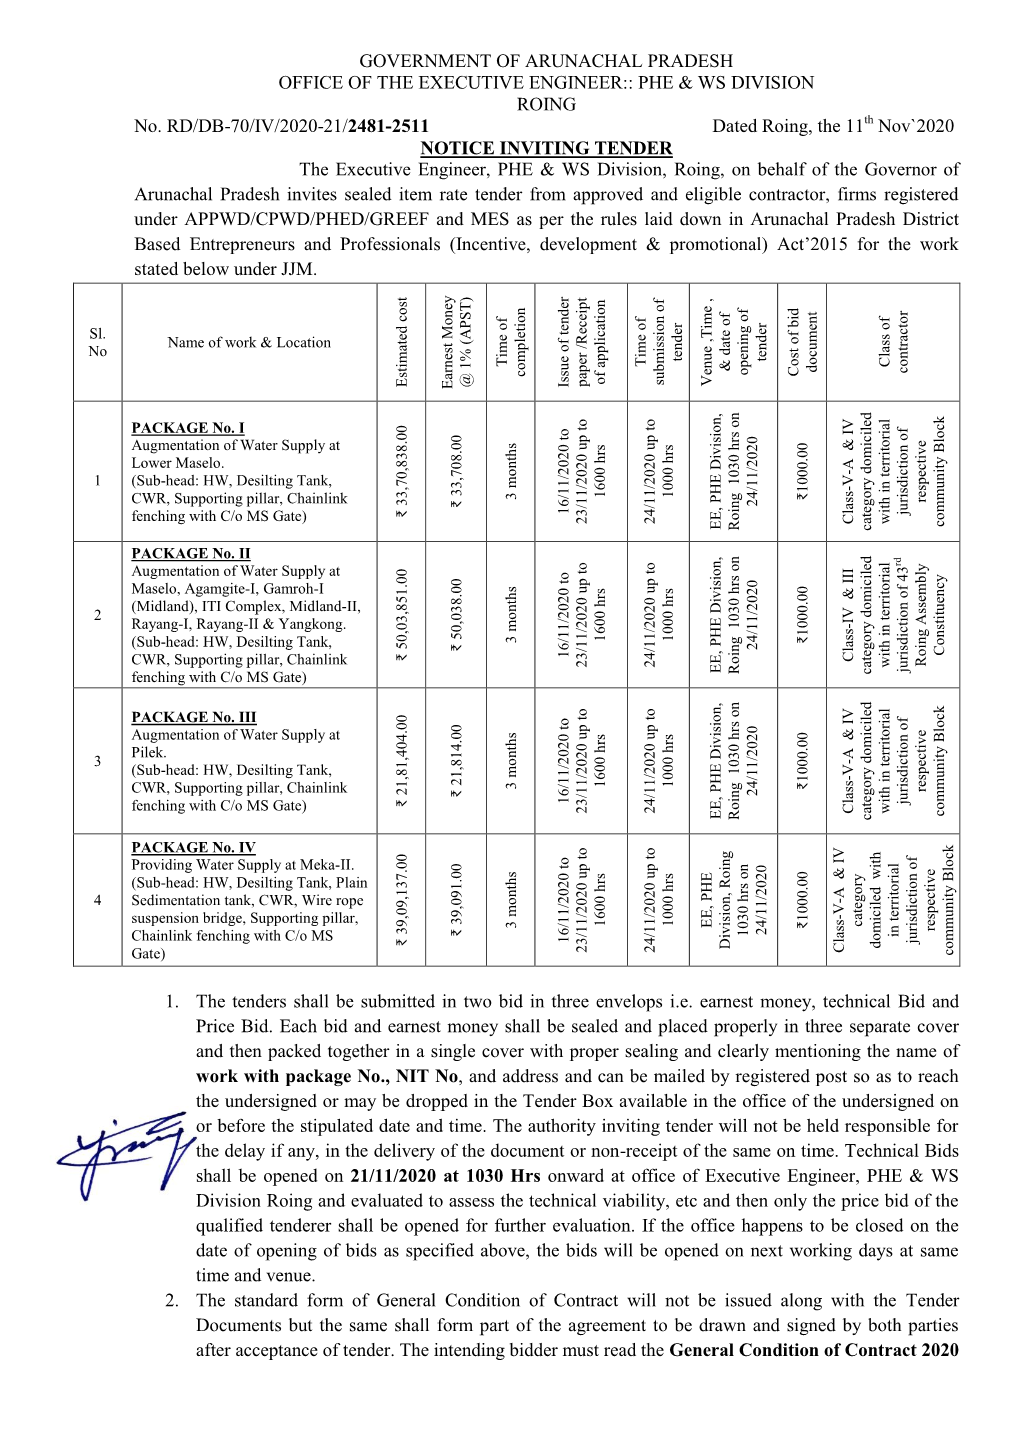 GOVERNMENT of ARUNACHAL PRADESH OFFICE of the EXECUTIVE ENGINEER:: PHE & WS DIVISION ROING No